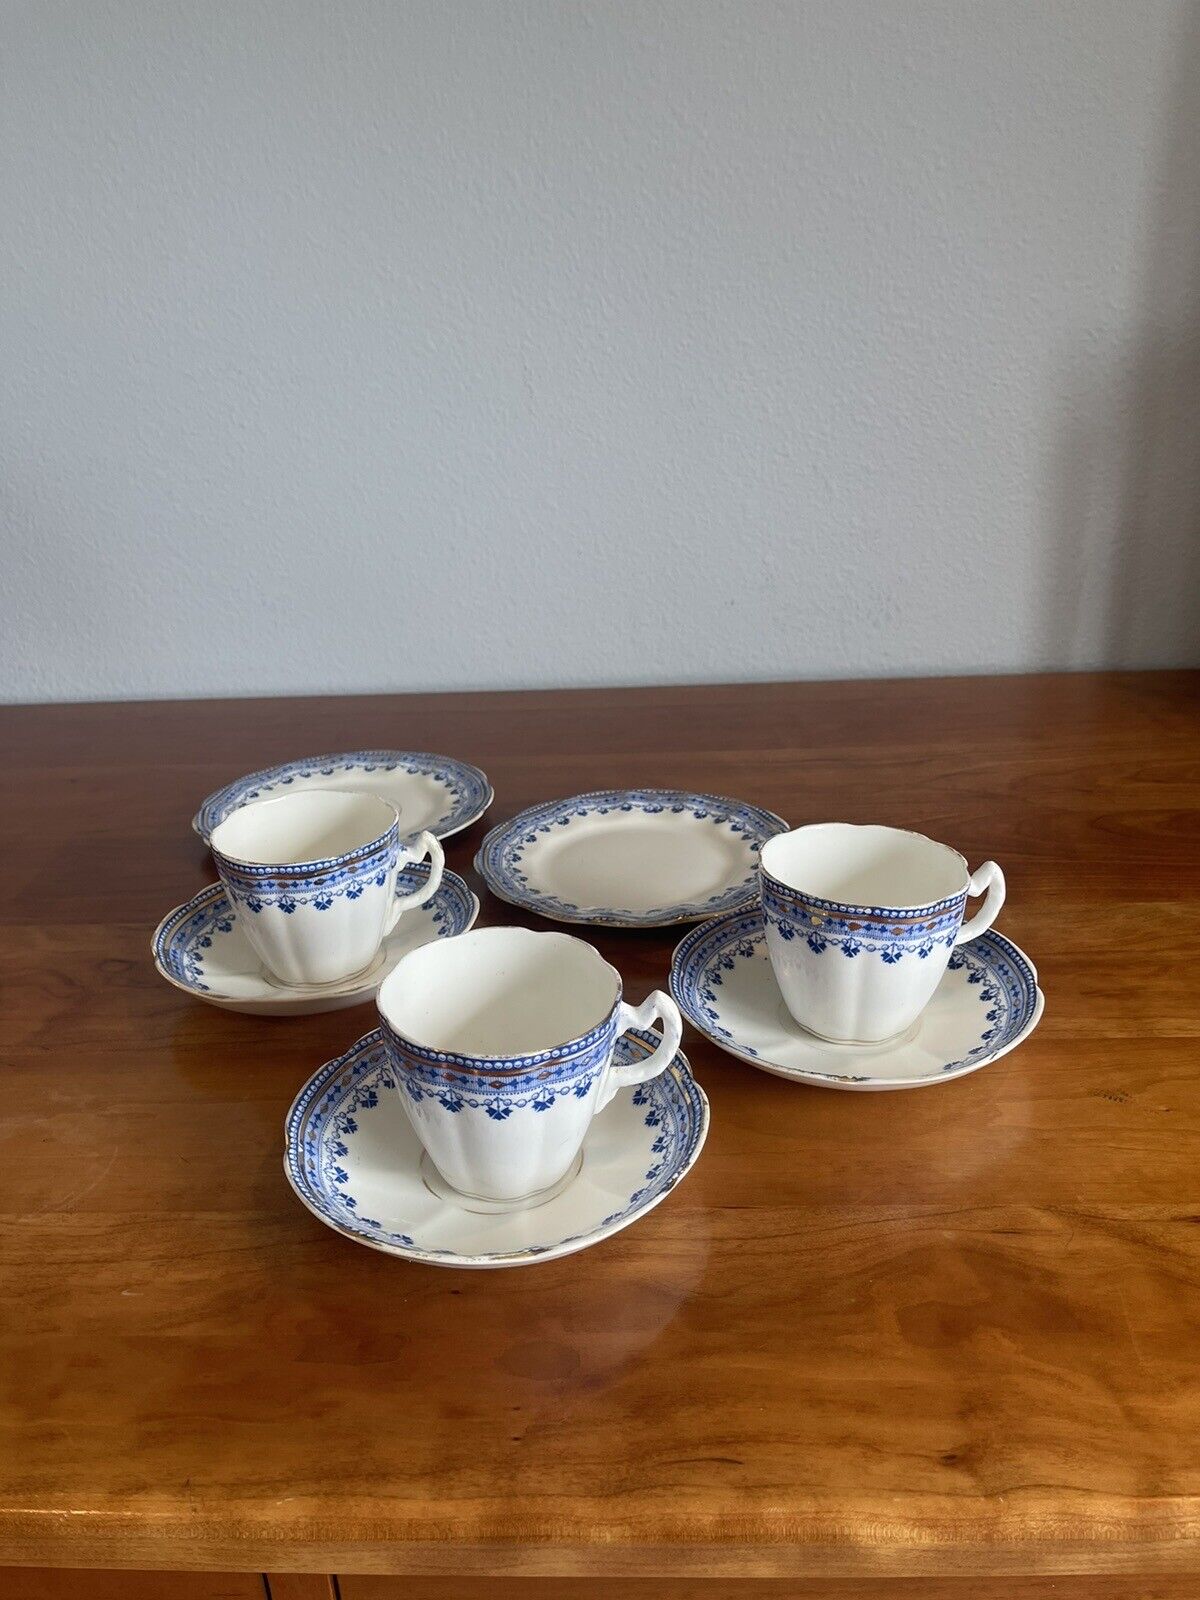 Antique lovely set of 3 blue, white & gold teacups & saucers with 2 small plates